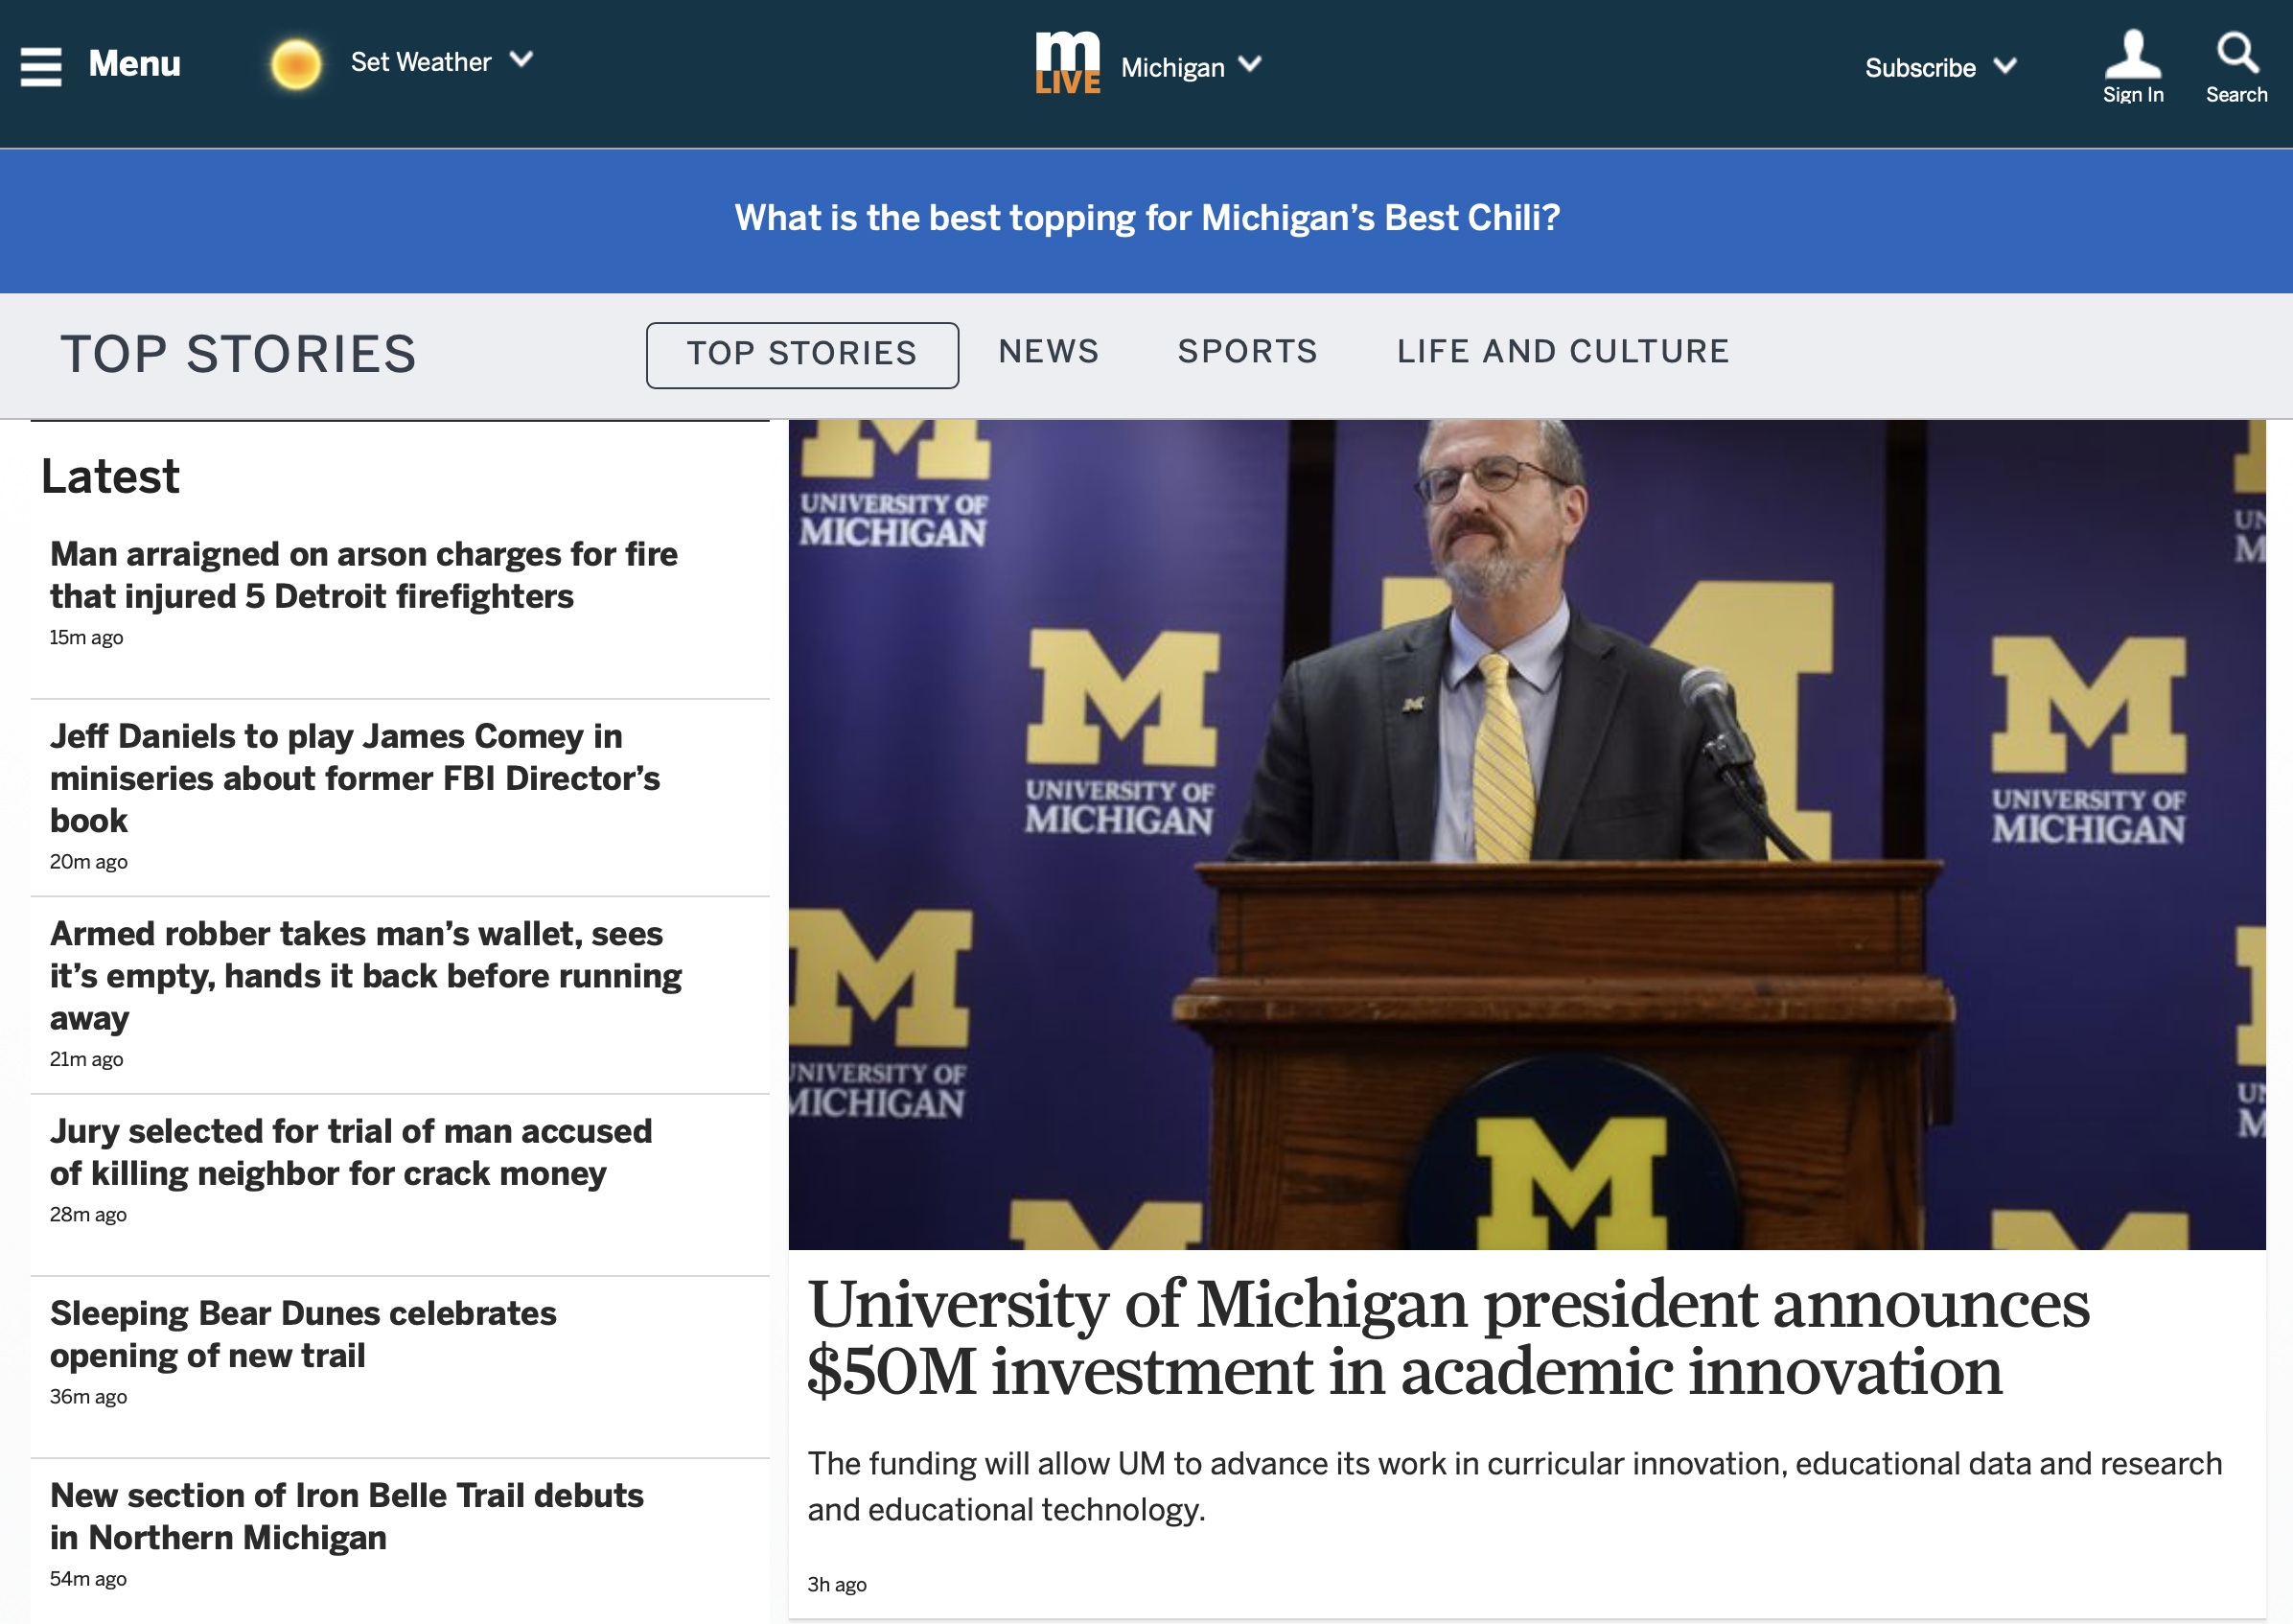 University of Michigan president announces $50M investment in academic innovation